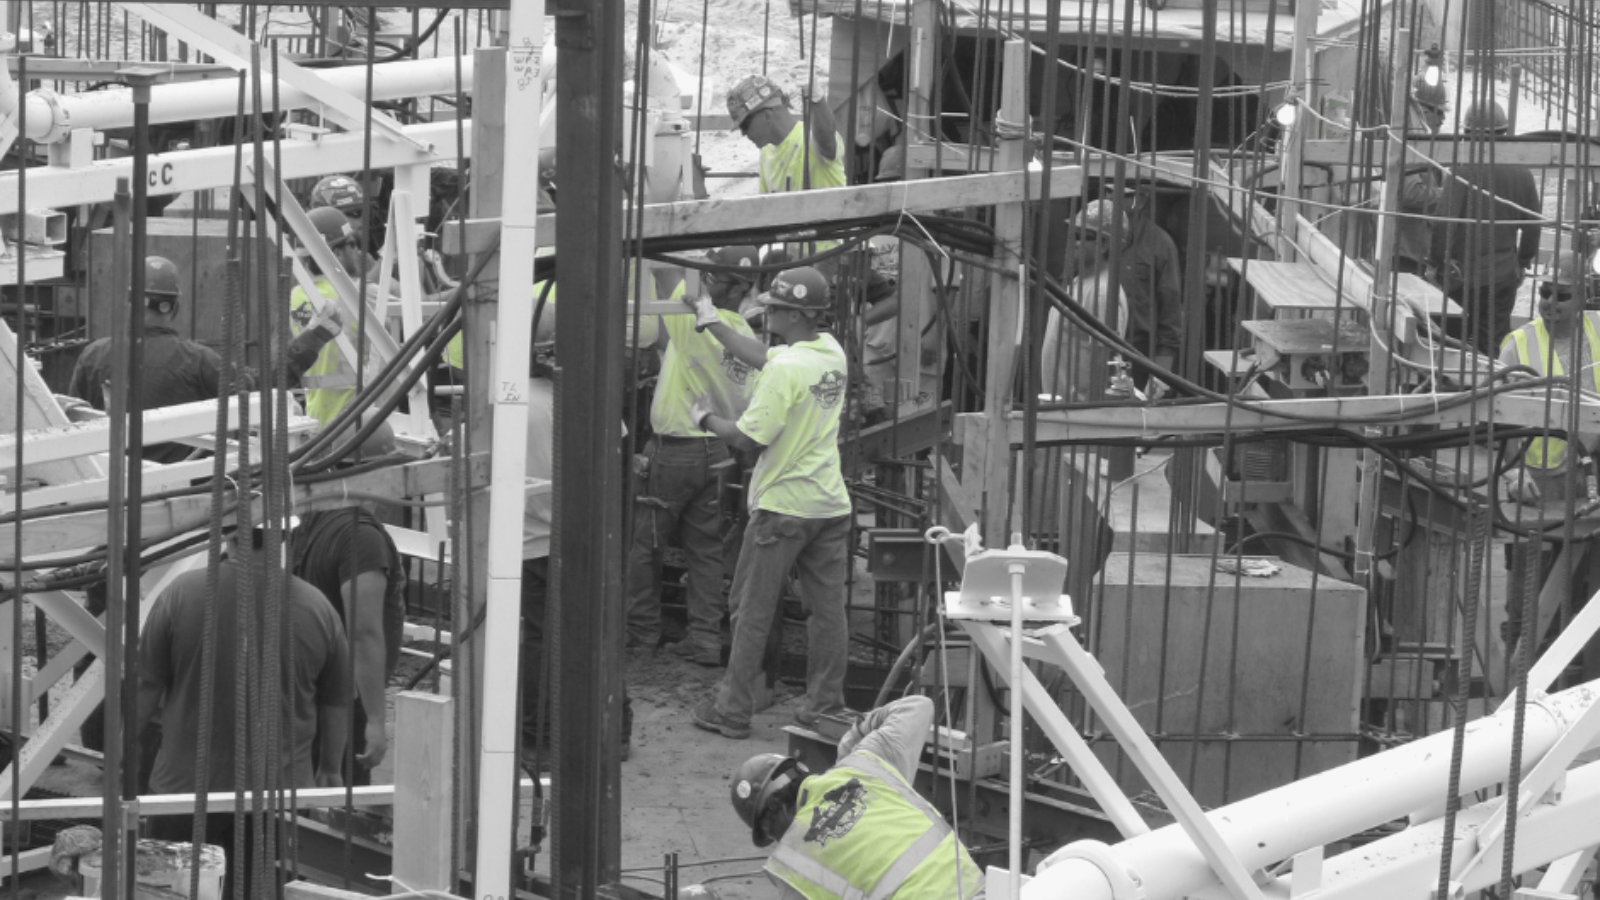 Crew of men in hard hats and neon shirts working on a construction site.